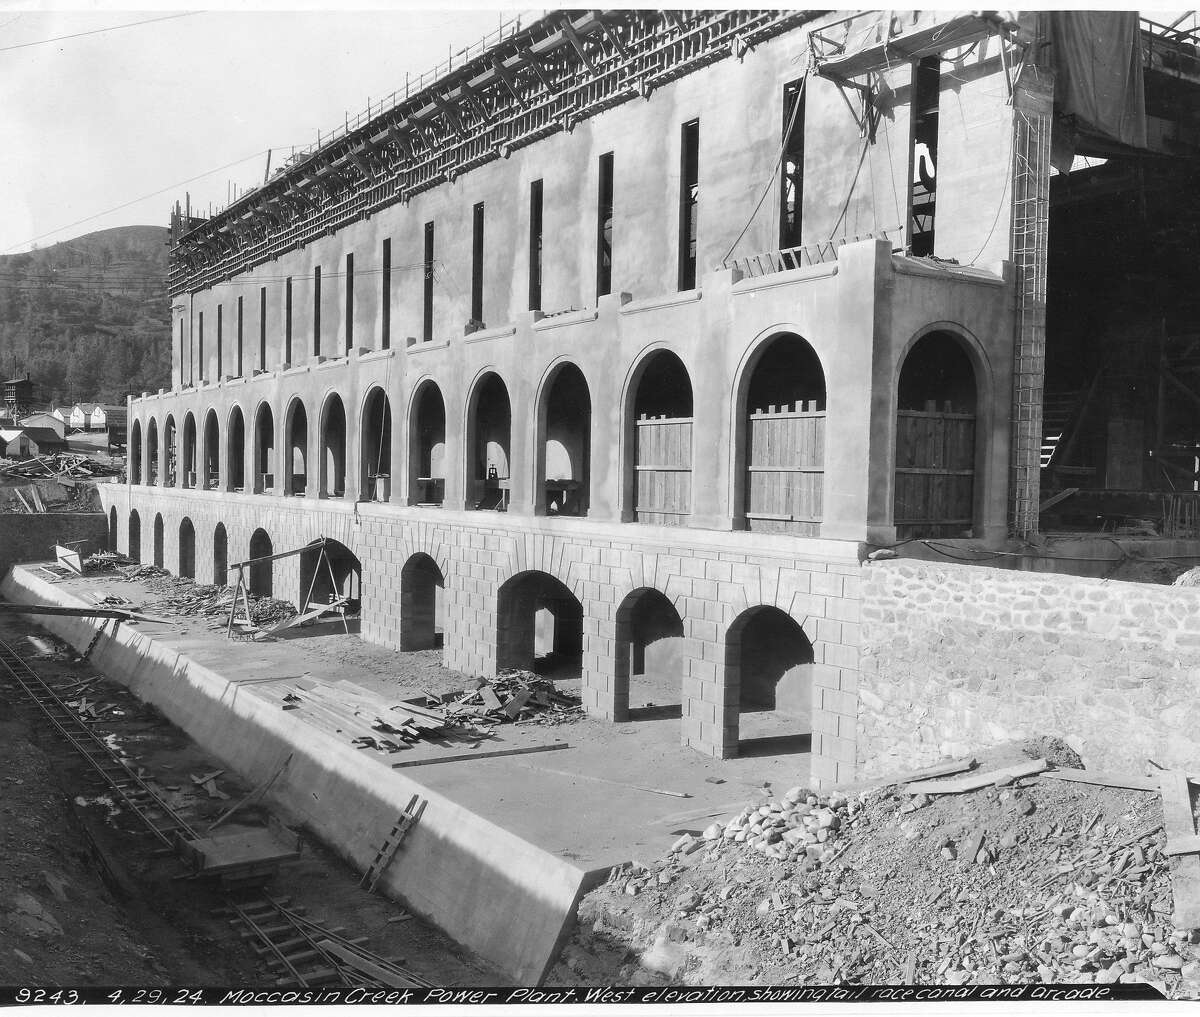 A stop on the Hetch Hetchy system, closeup of the exterior of the Moccasin Power Plan under construction, April 28, 1924 Handout photo courtesy of Hetch Hetchy Water Service